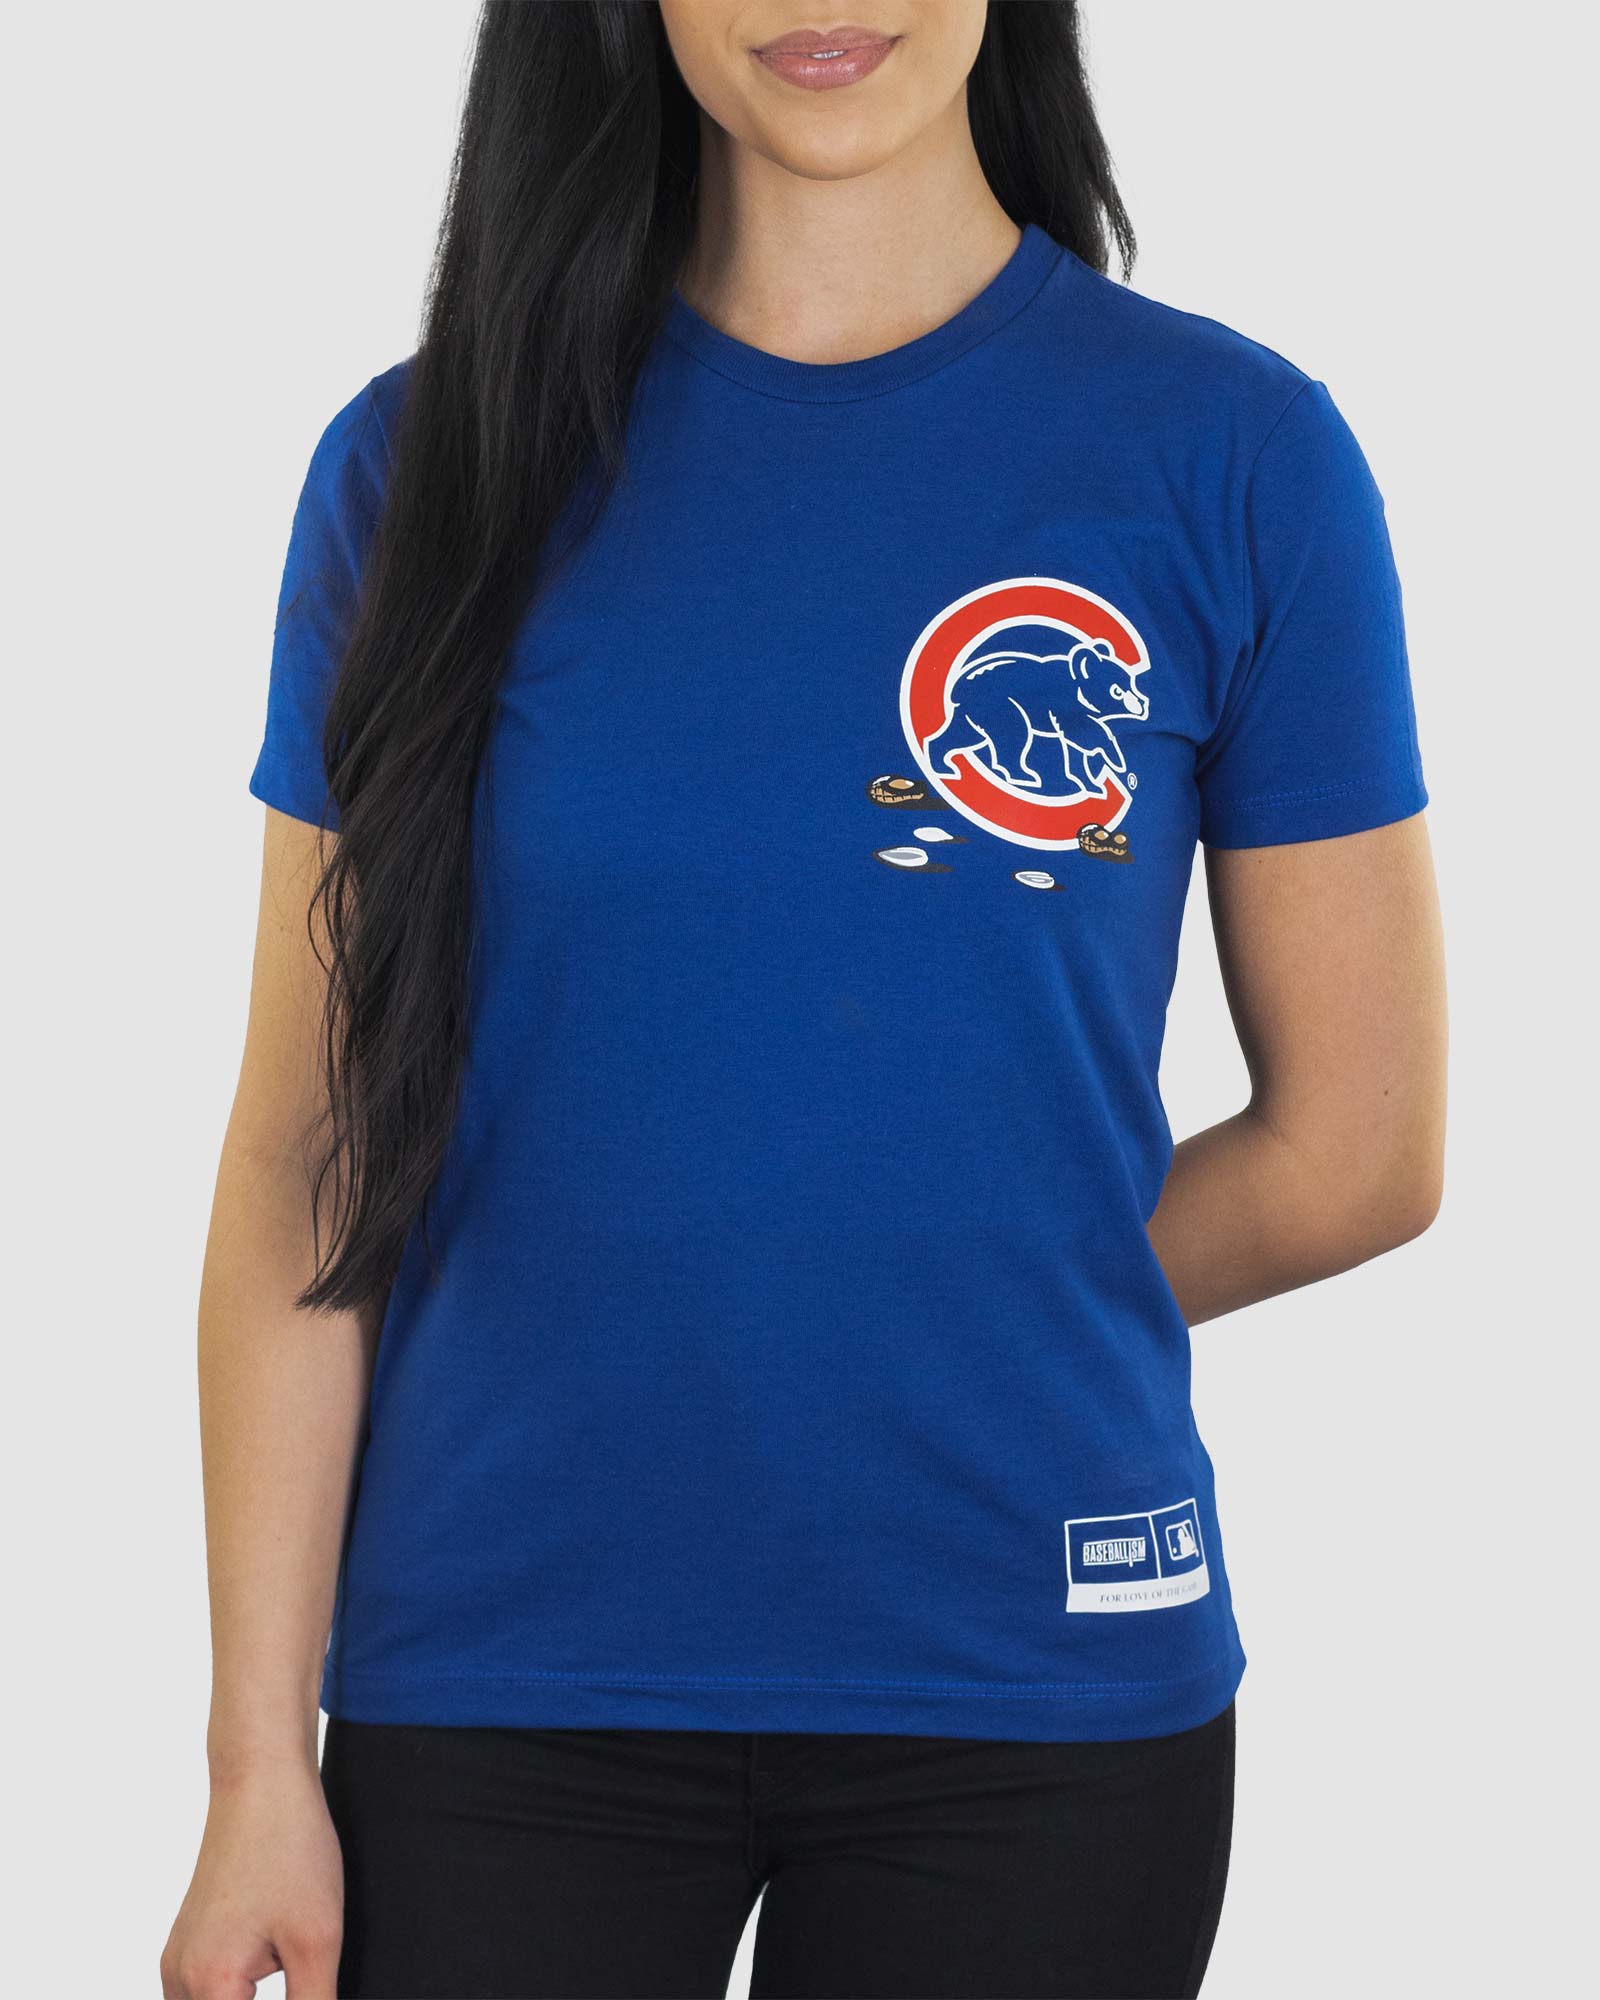 Get Your Peanuts! - Chicago Cubs